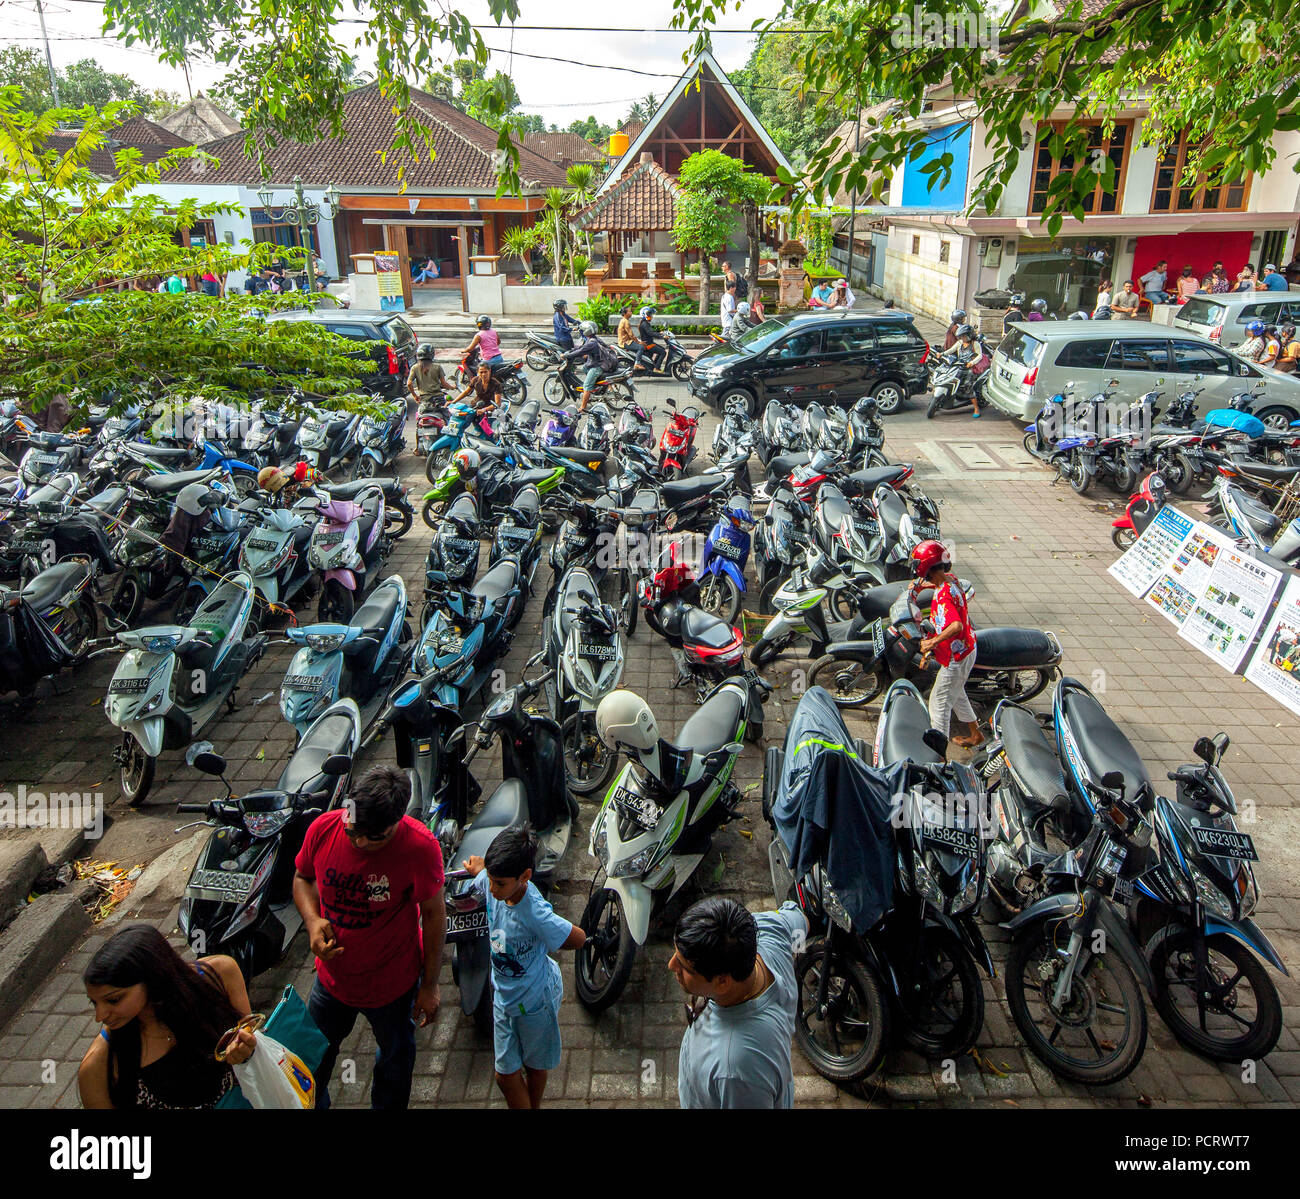 Motorcycle parking, street scene, motorcycles and scooters on a parking lot in the middle of Ubud, Ubud, Bali, Indonesia, Asia Stock Photo